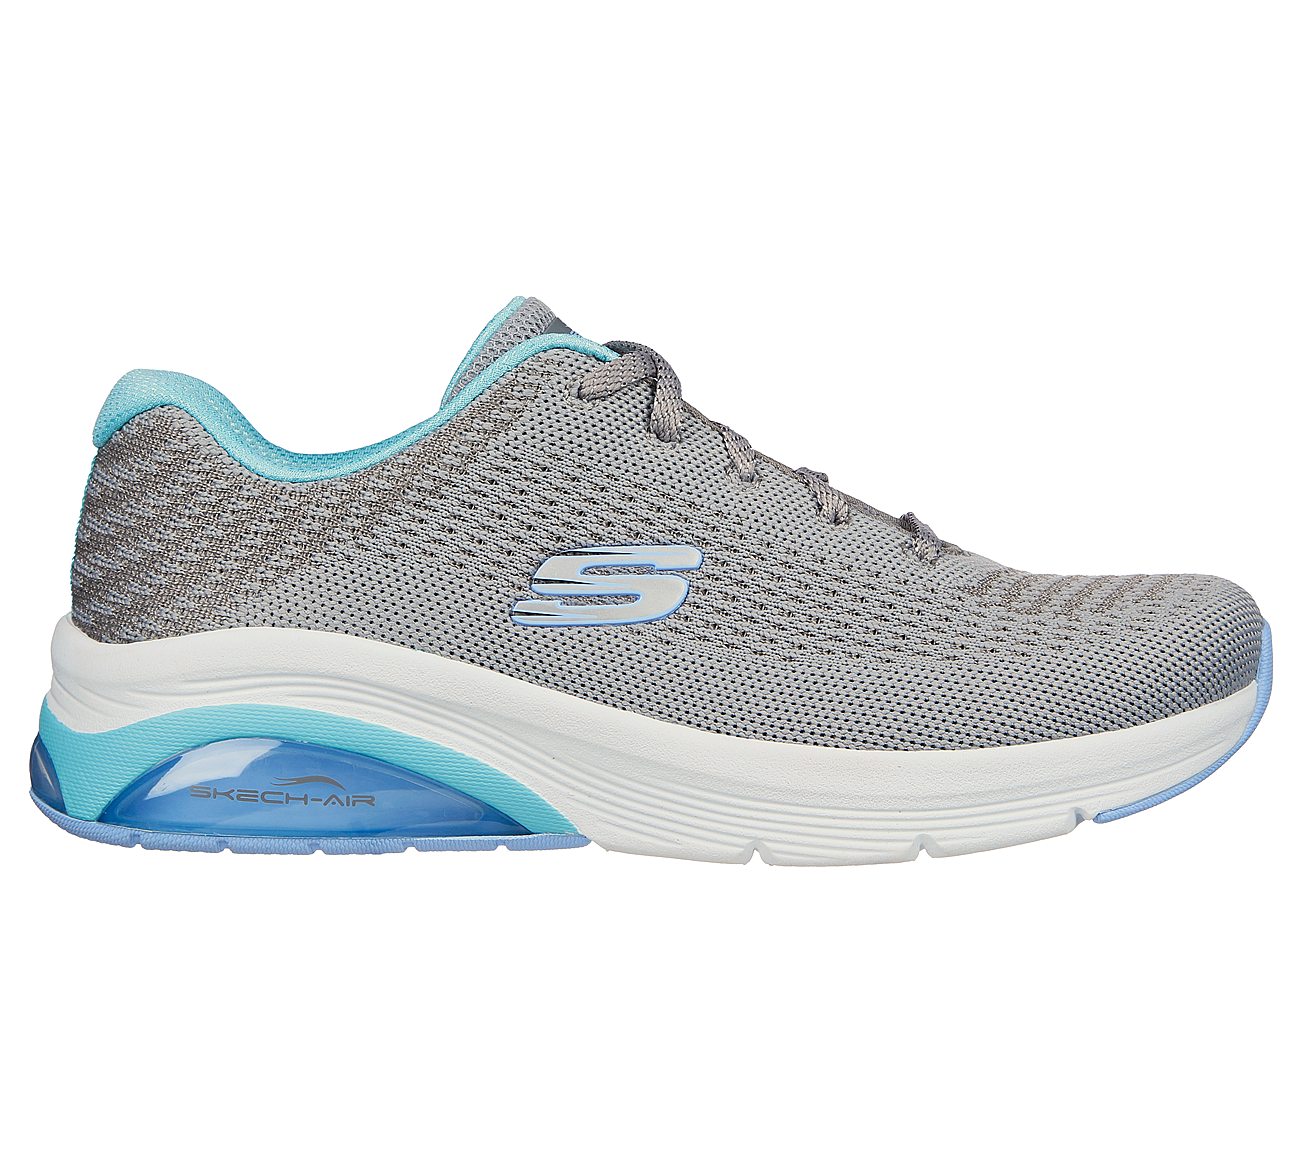 SKECH-AIR EXTREME 2.0-CLASSIC, GREY/MINT Footwear Right View